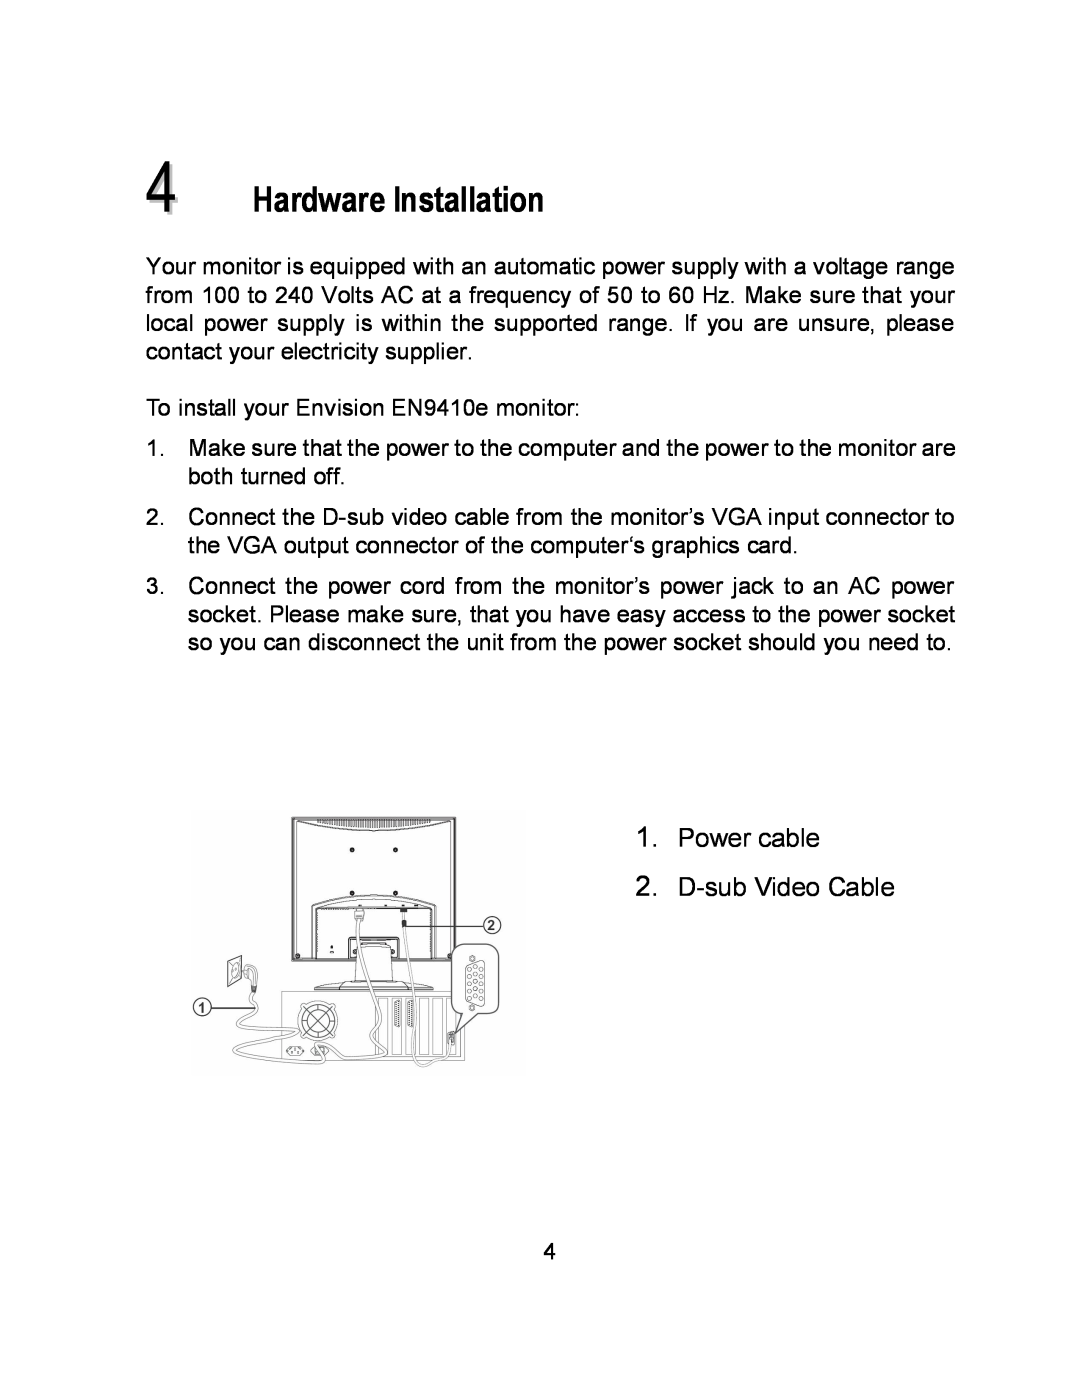 Envision Peripherals EN9410e user manual Hardware Installation, Power cable 2. D-sub Video Cable 